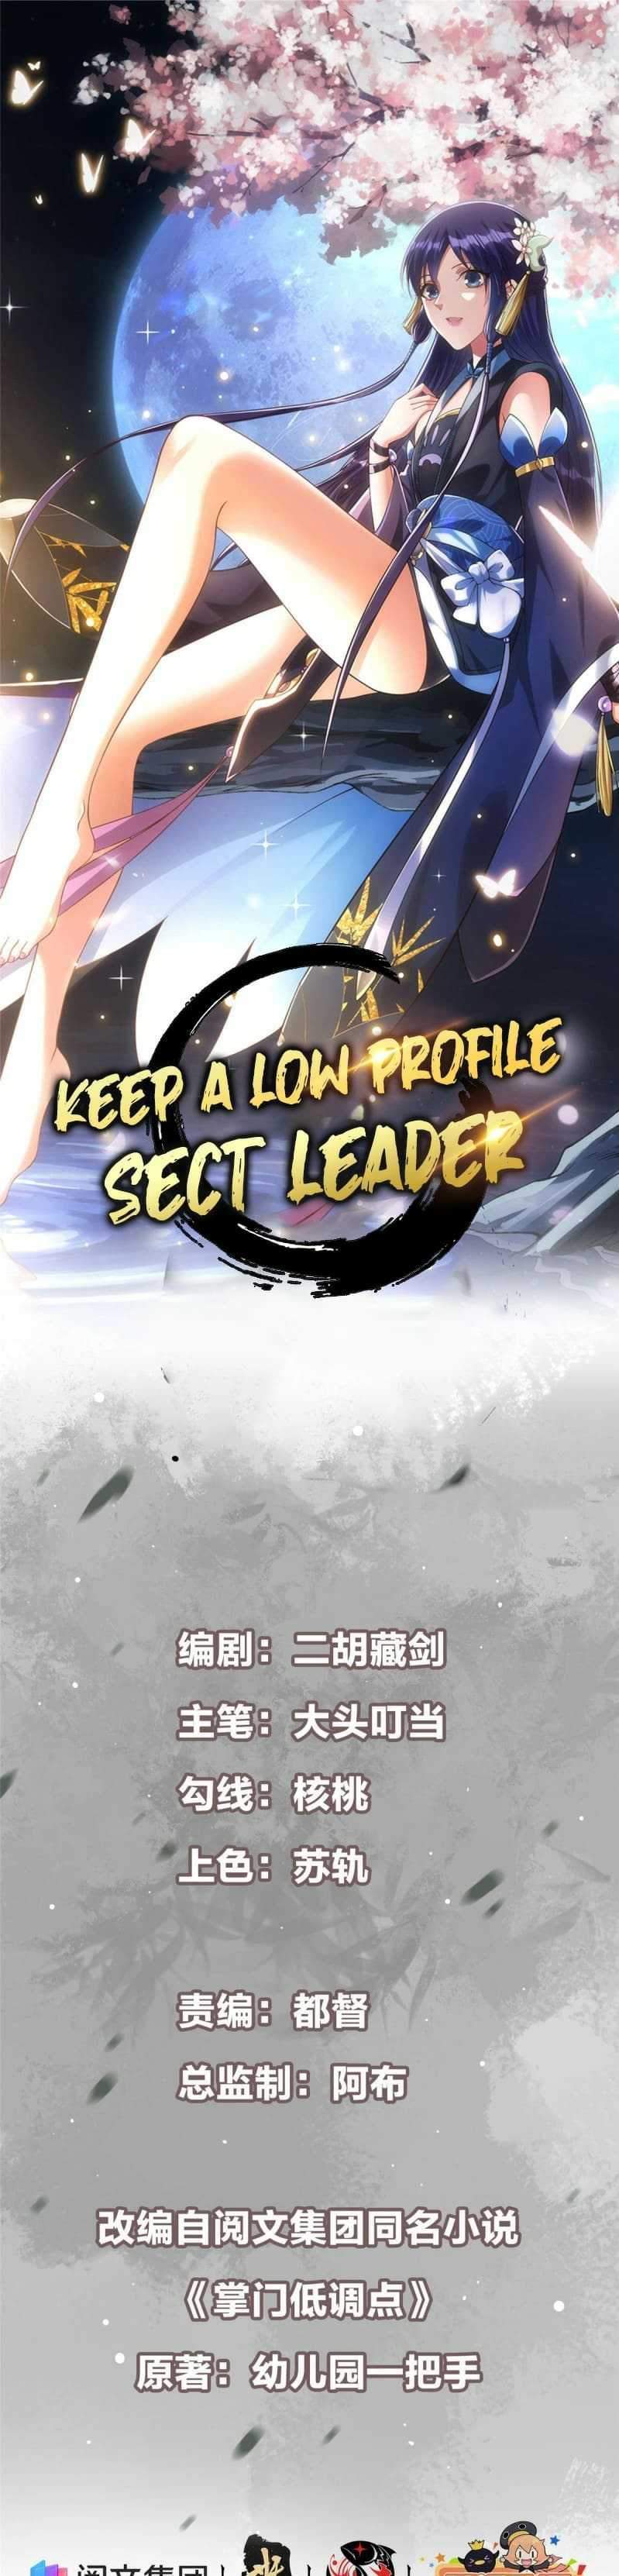 Keep A Low Profile, Sect Leader Chapter 01 Image 1